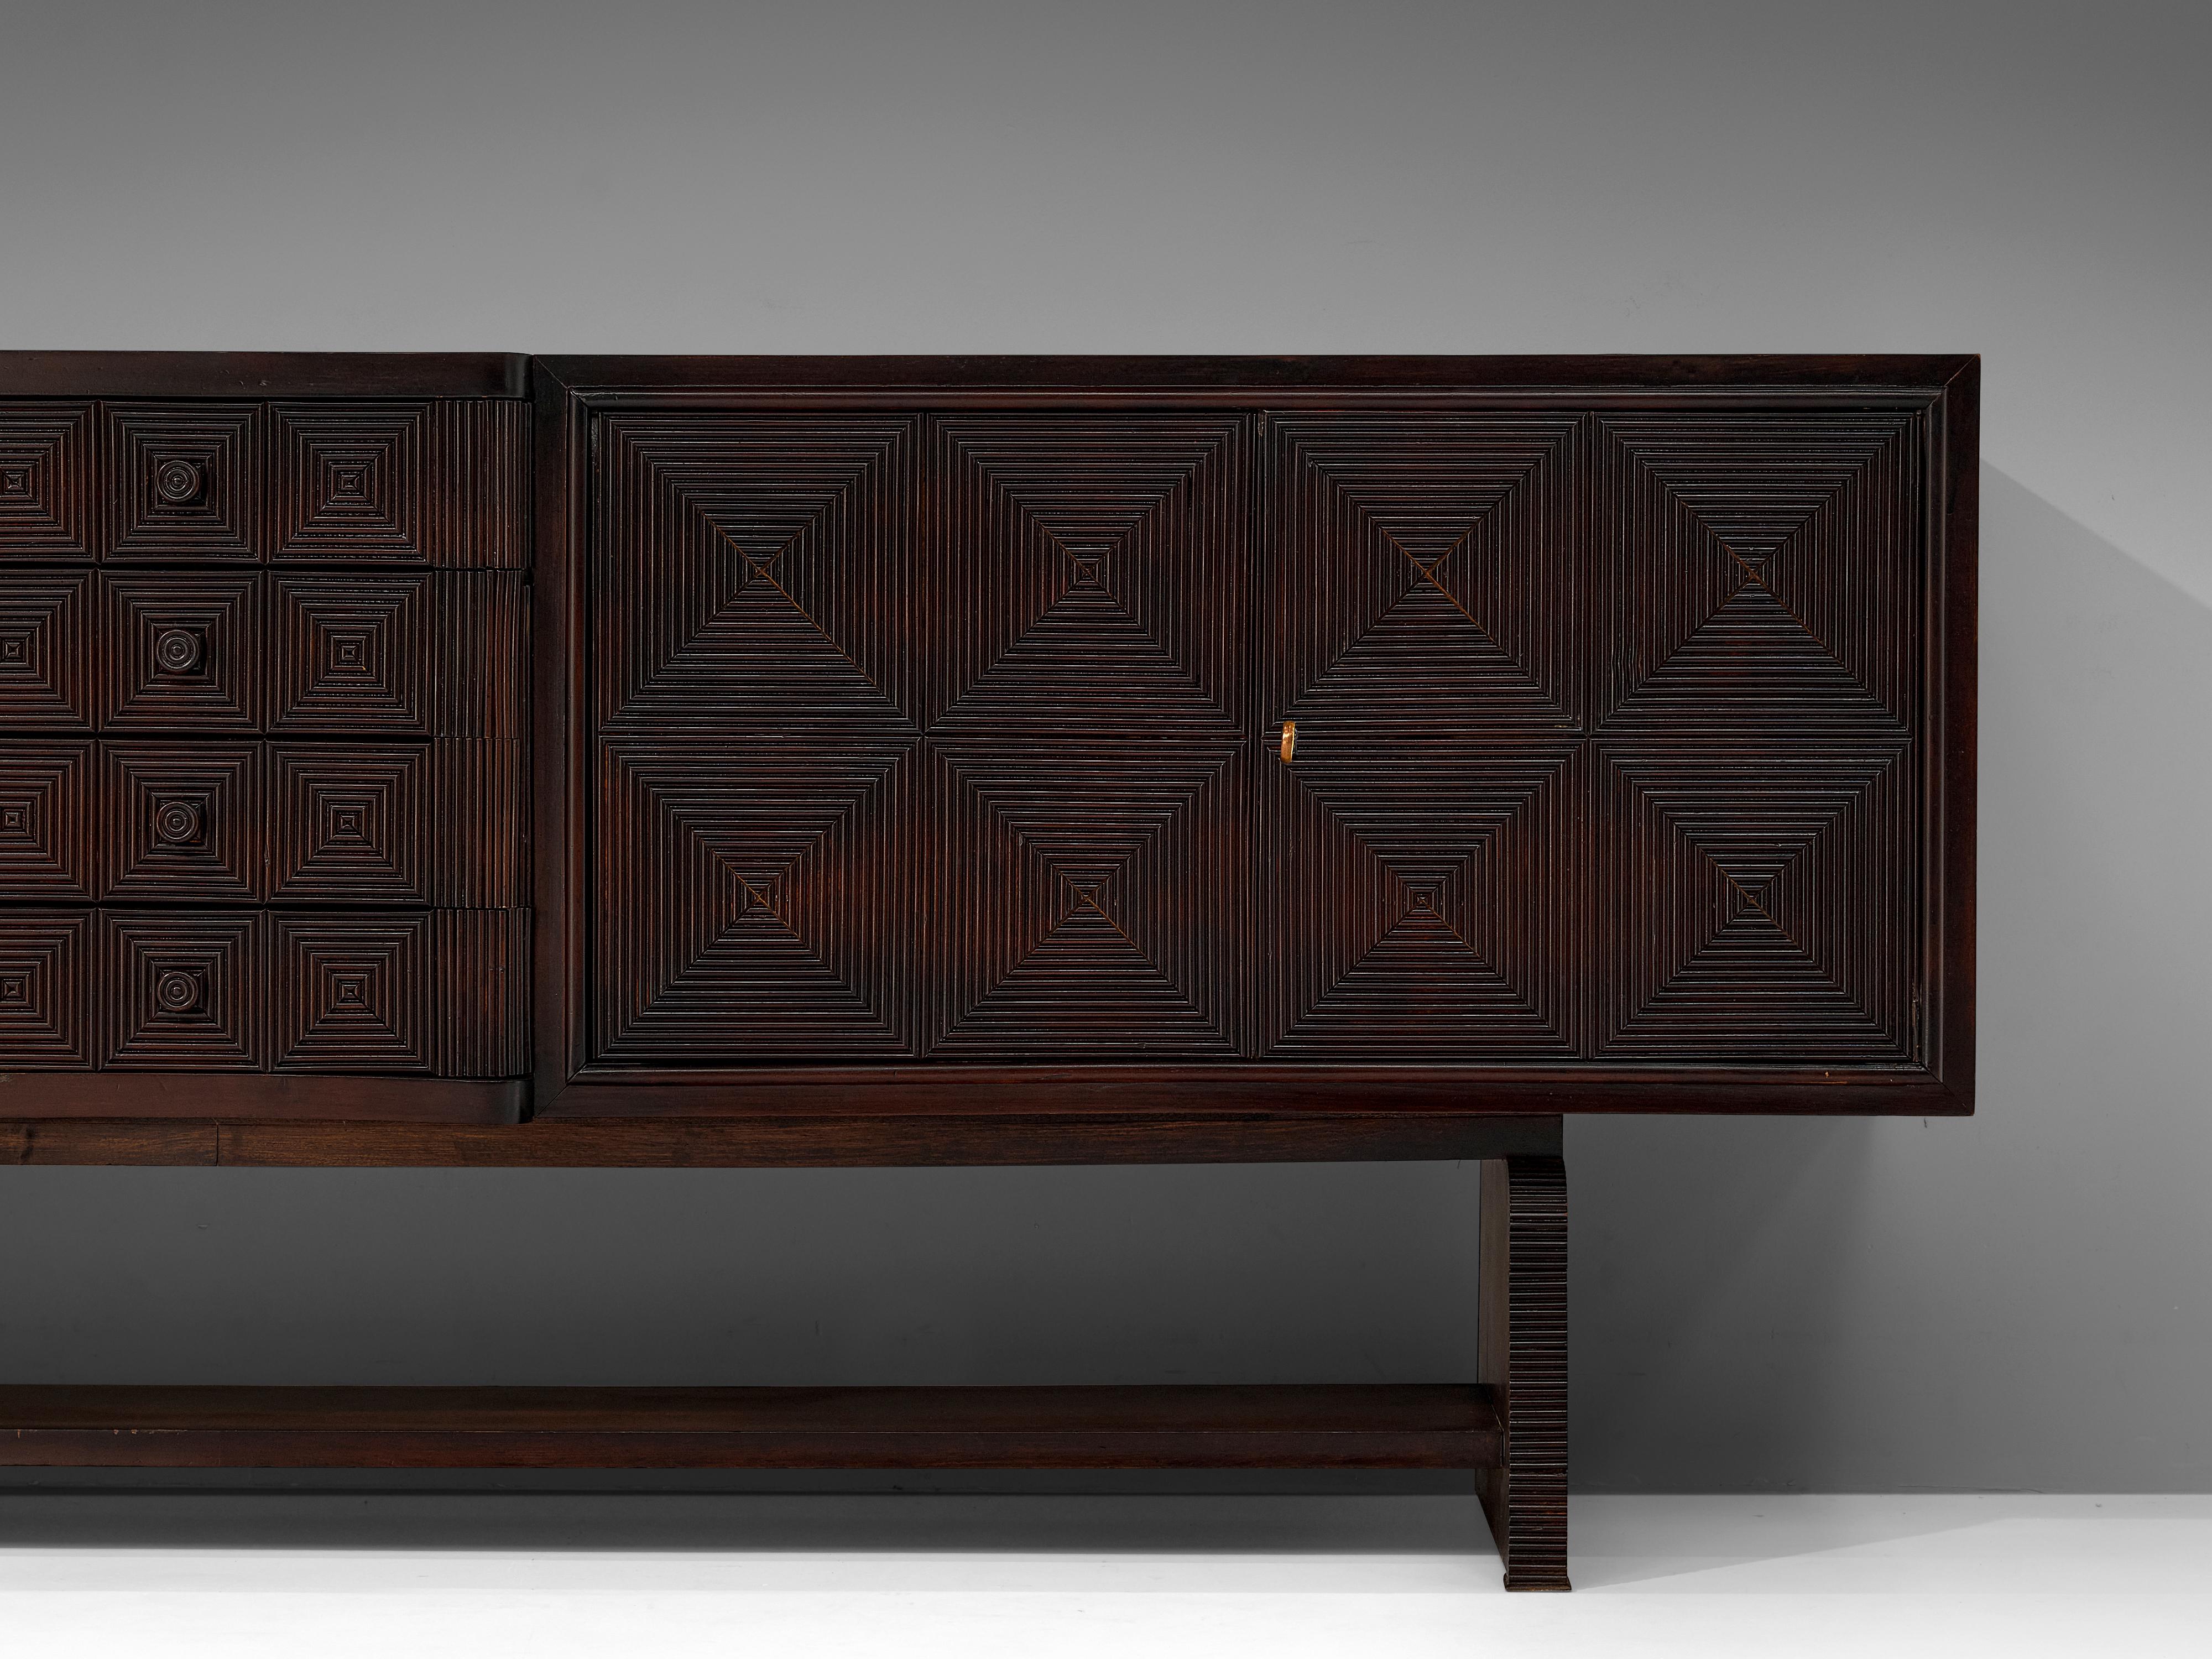 Grand European Sideboard in Stained Wood with Carved Doors 2